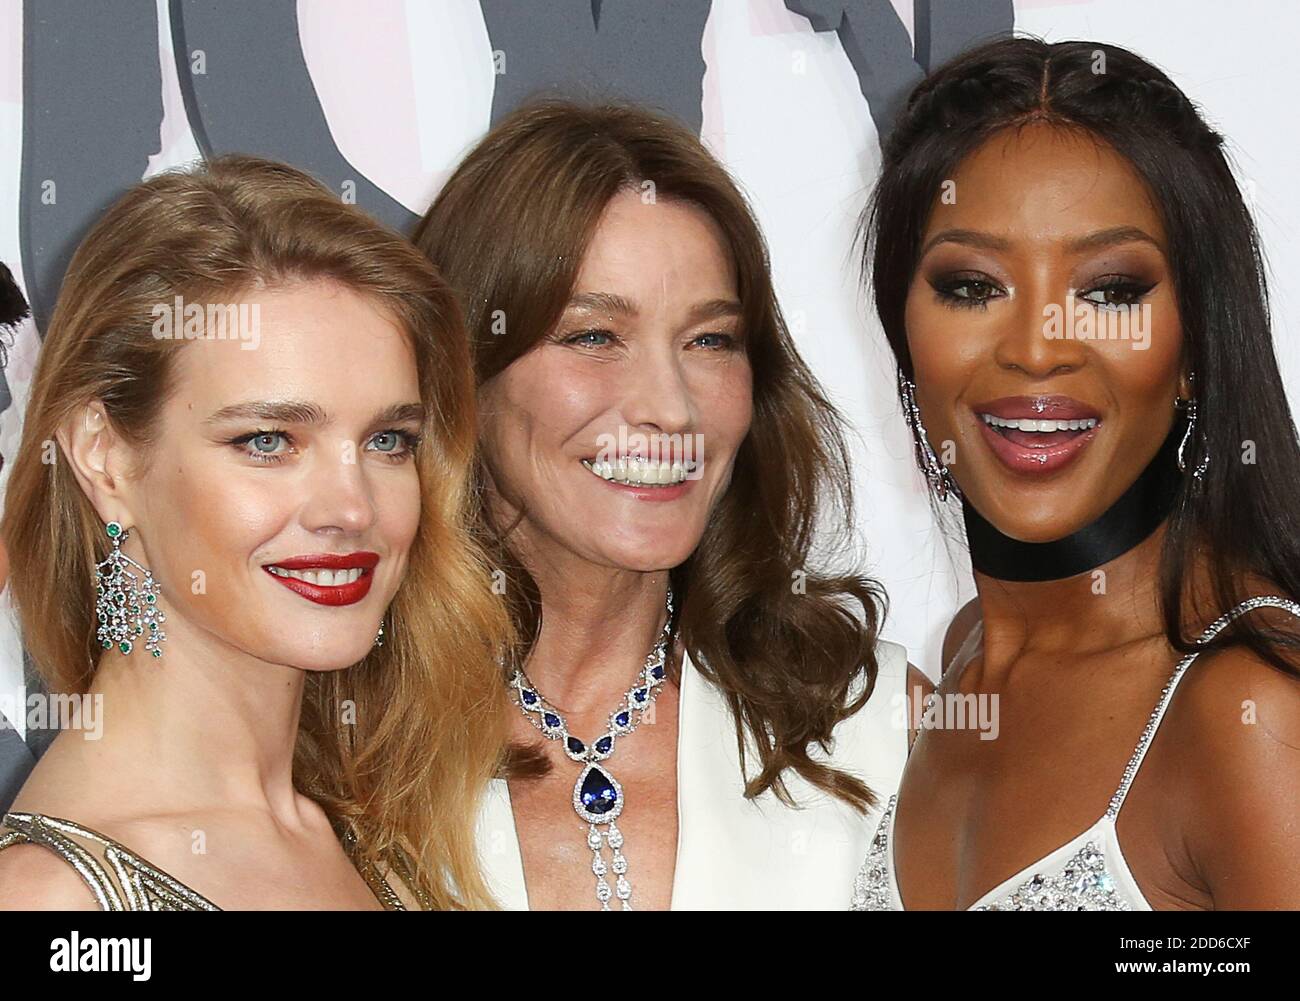 Natalia Vodianova, Carla Bruni-Sarkozy, Naomi Campbell attend Fashion for Relief Cannes 2018 at Aeroport Cannes Mandelieu during the 71st annual Cannes Film Festival on May 13, 2018 in Cannes, France. Photo by Nasser Berzane/ABACAPRESS.COM Stock Photo